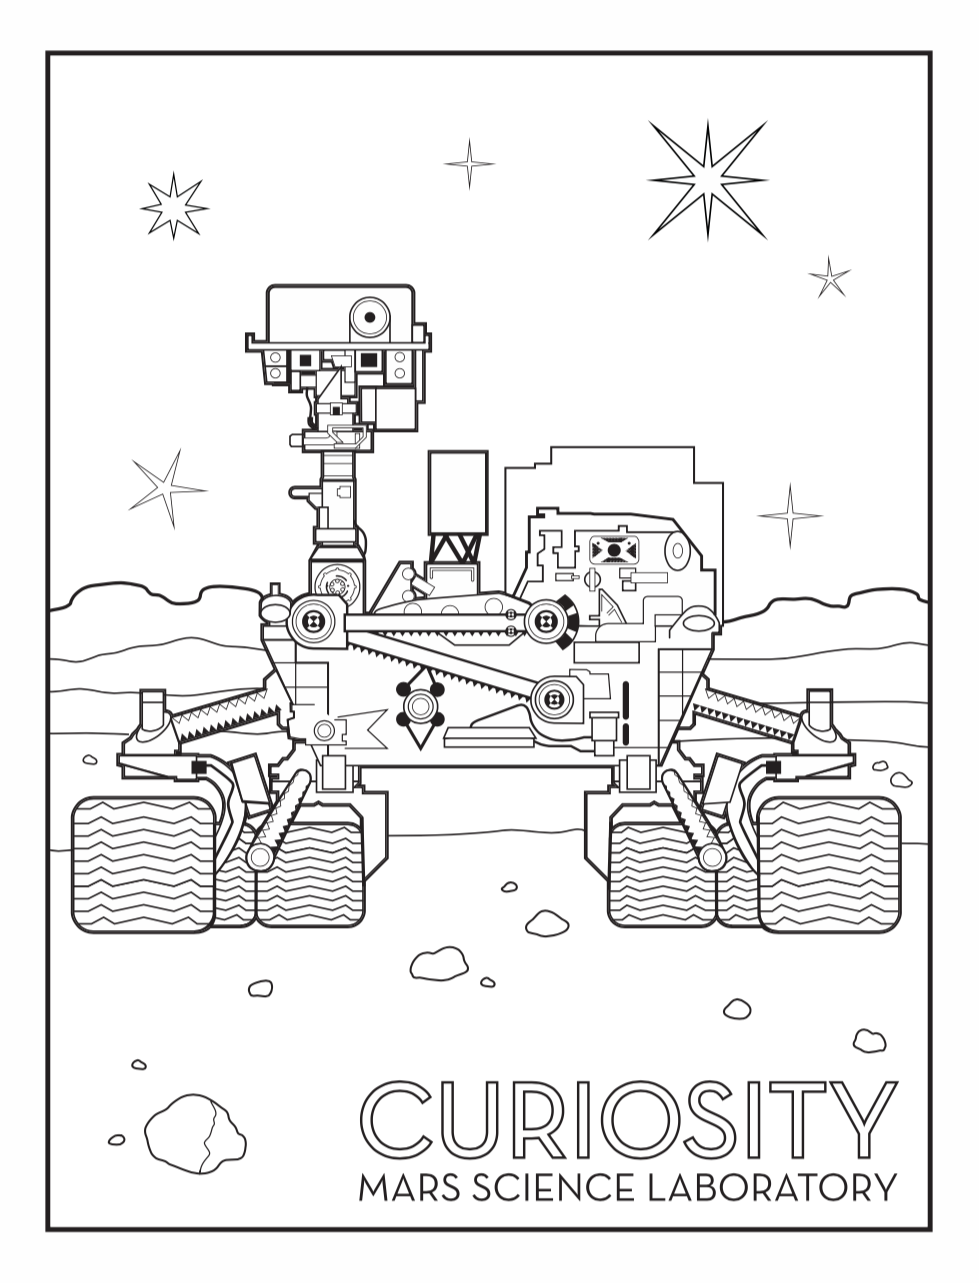 Beyond: A Coloring Book of Space Exploration